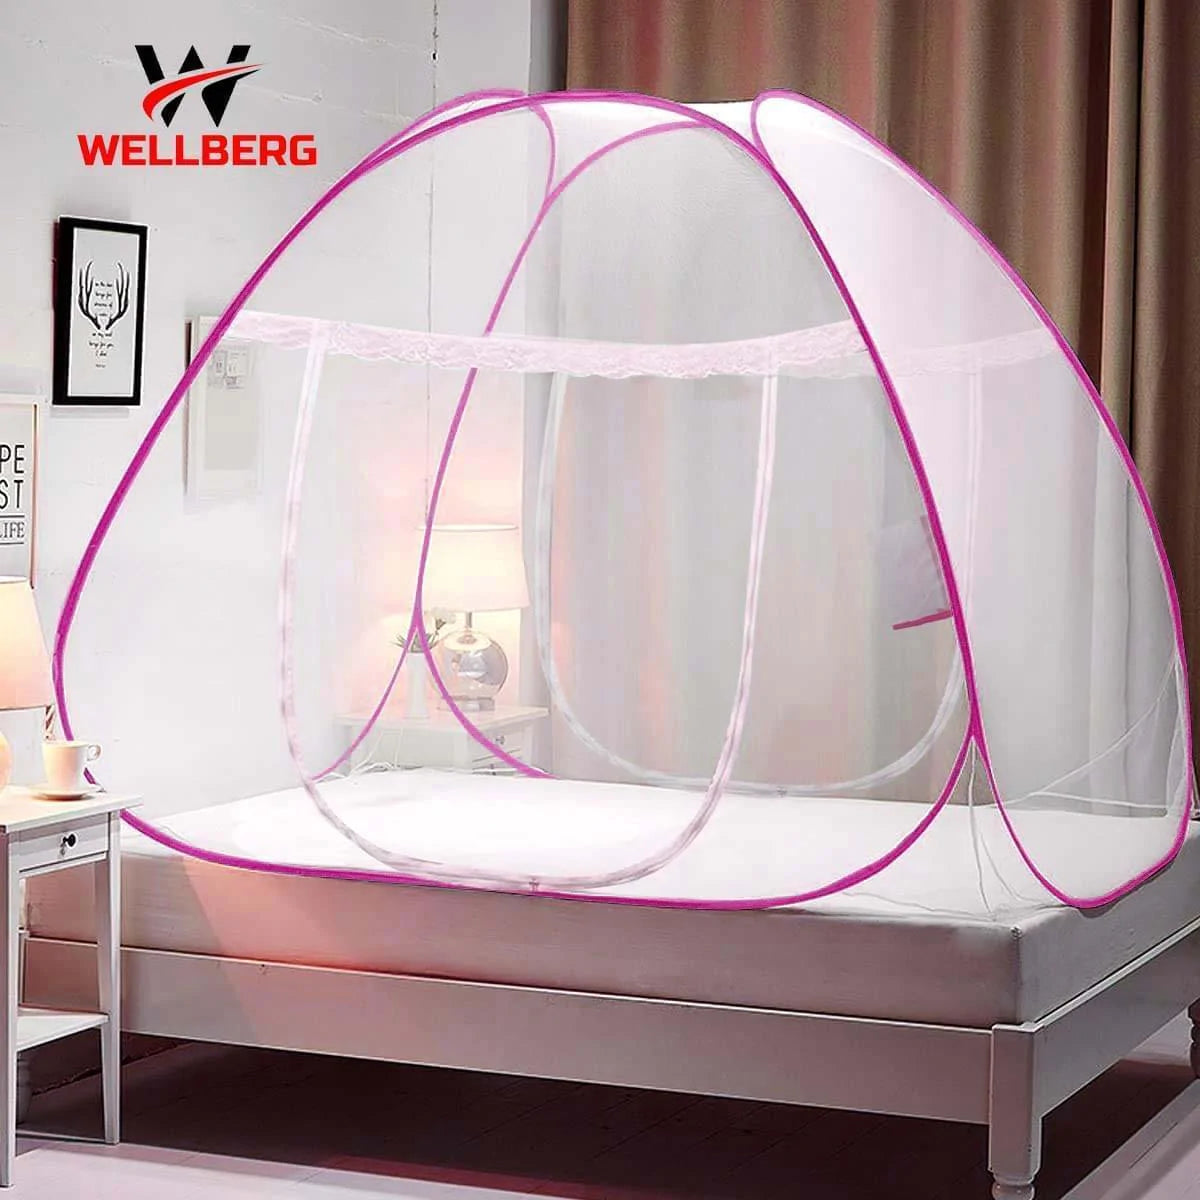 Wellberg Mosquito Net, Double Bed (Queen Size, 24-30 GSM, Foldable, Highly Durable) - Pink - WELLBERG